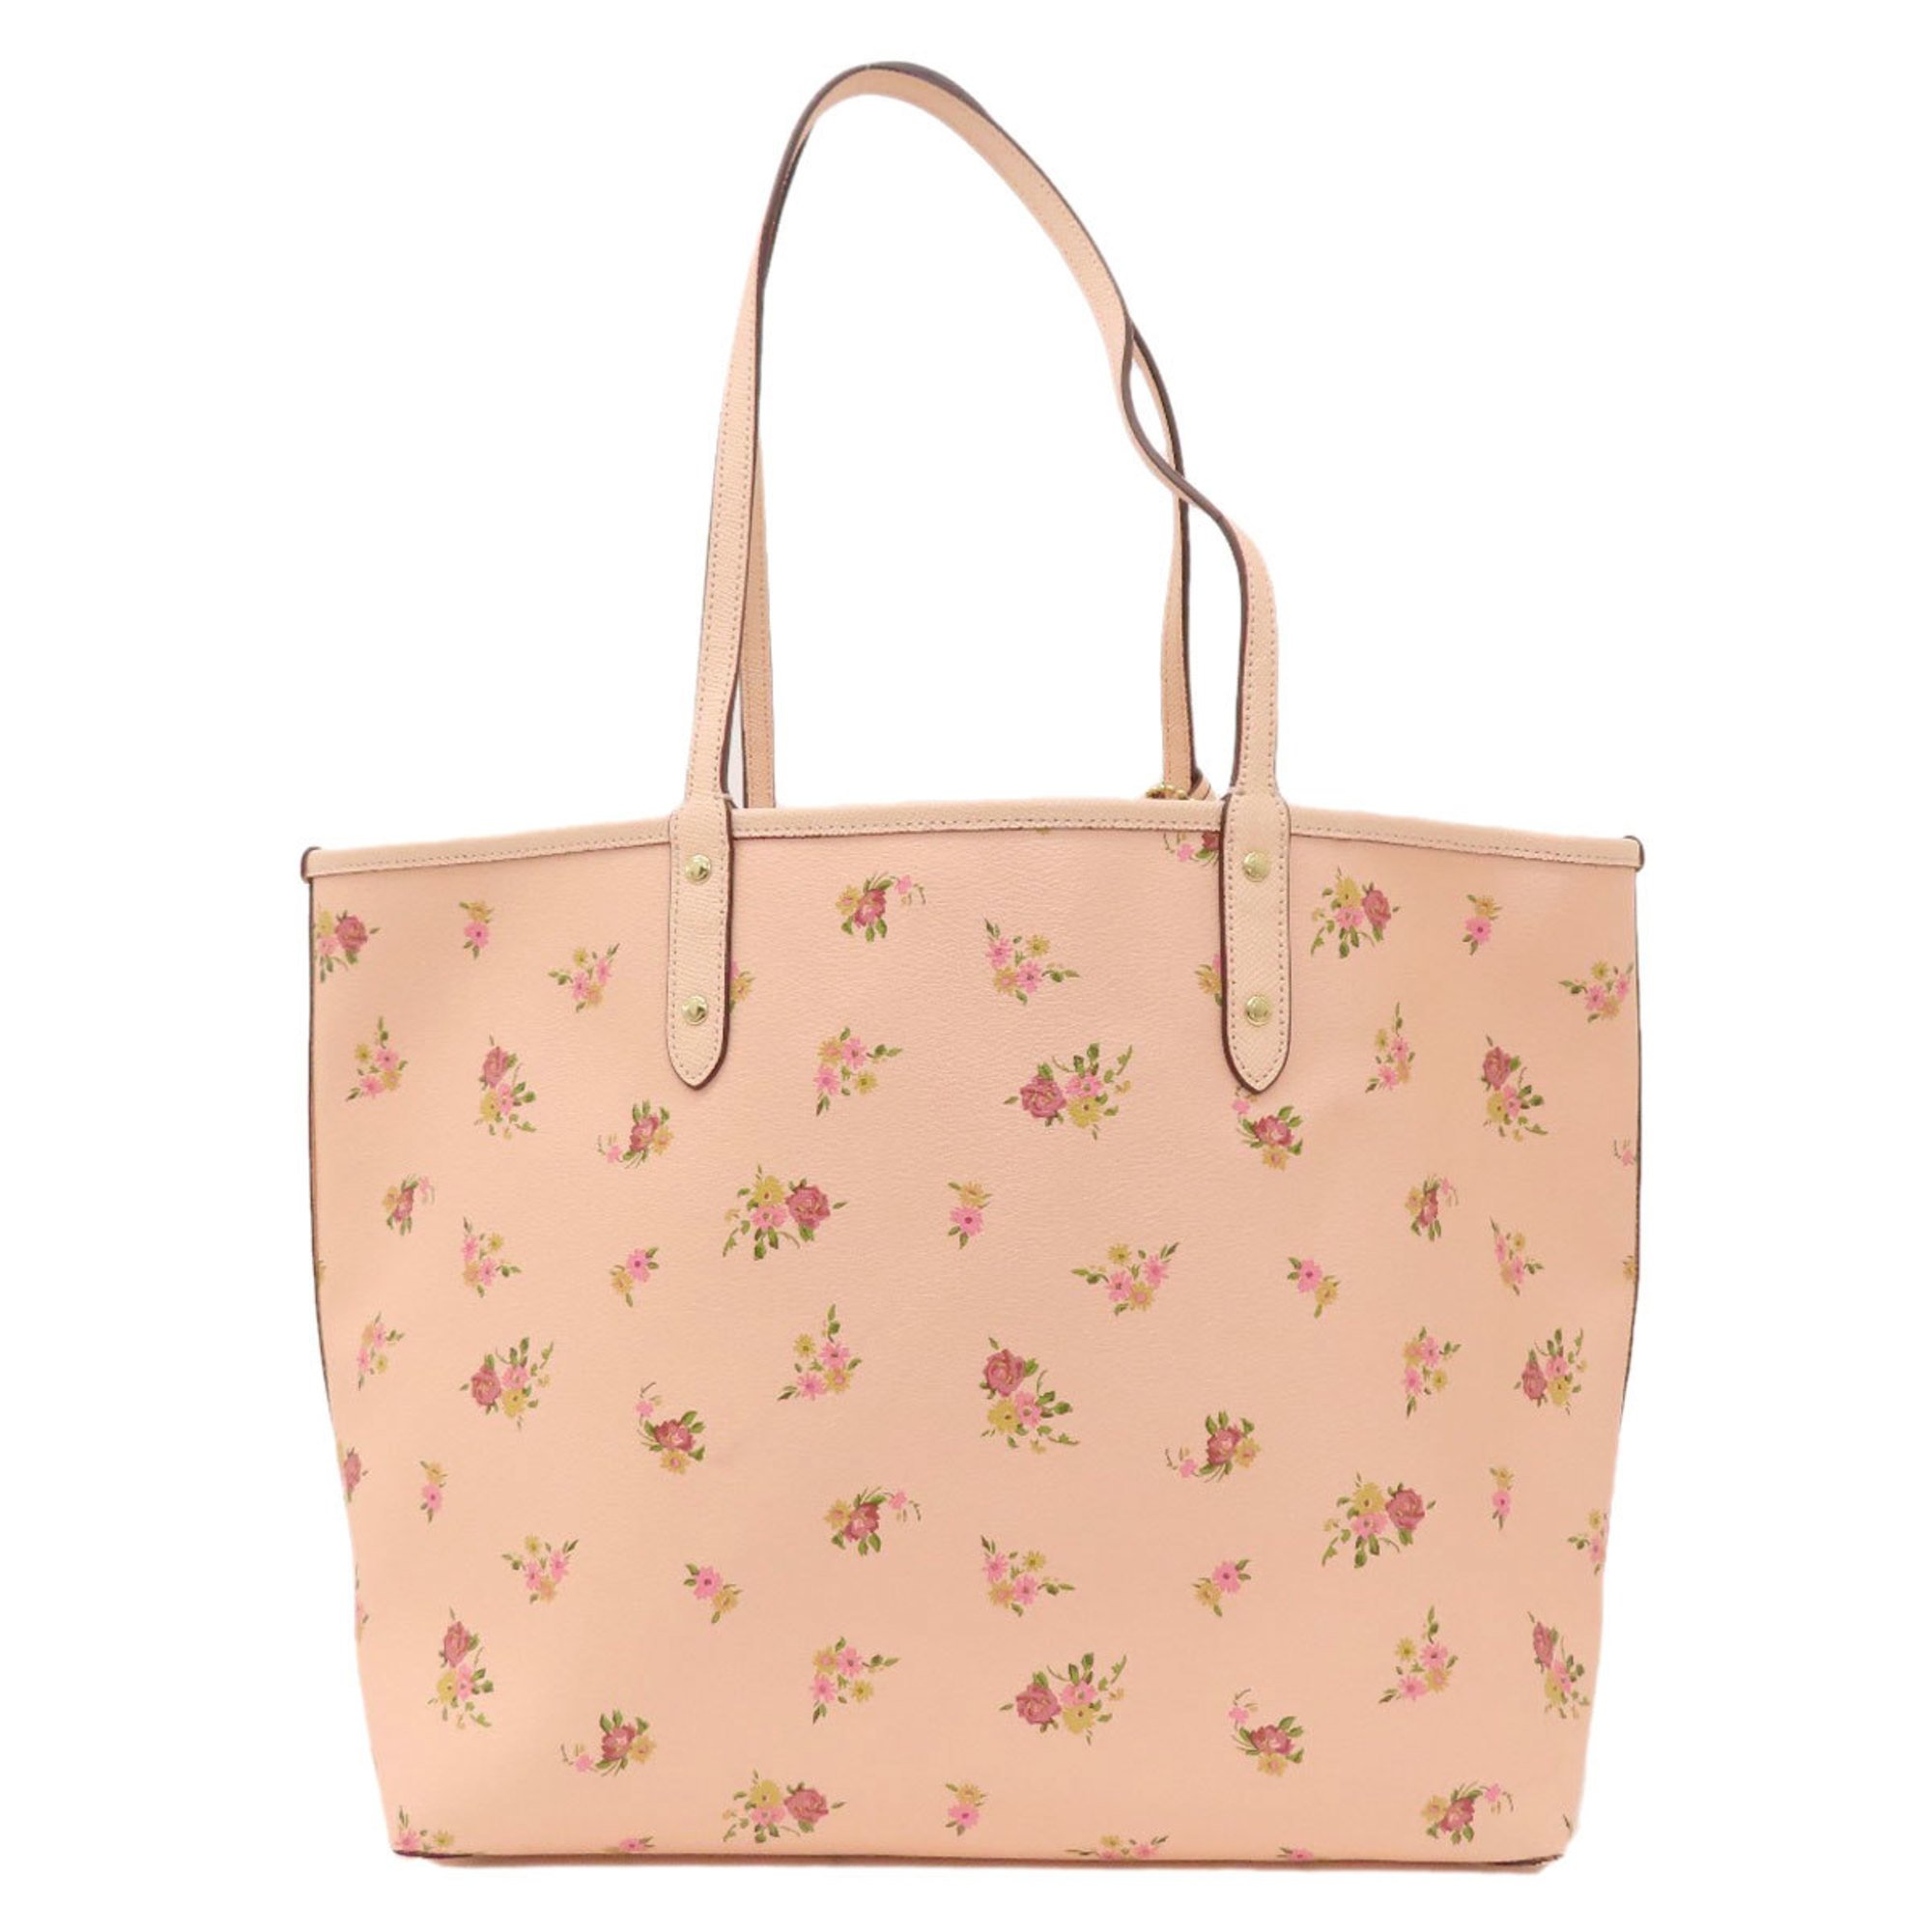 Coach F29359 Reversible Disney Collaboration Tote Bag for Women